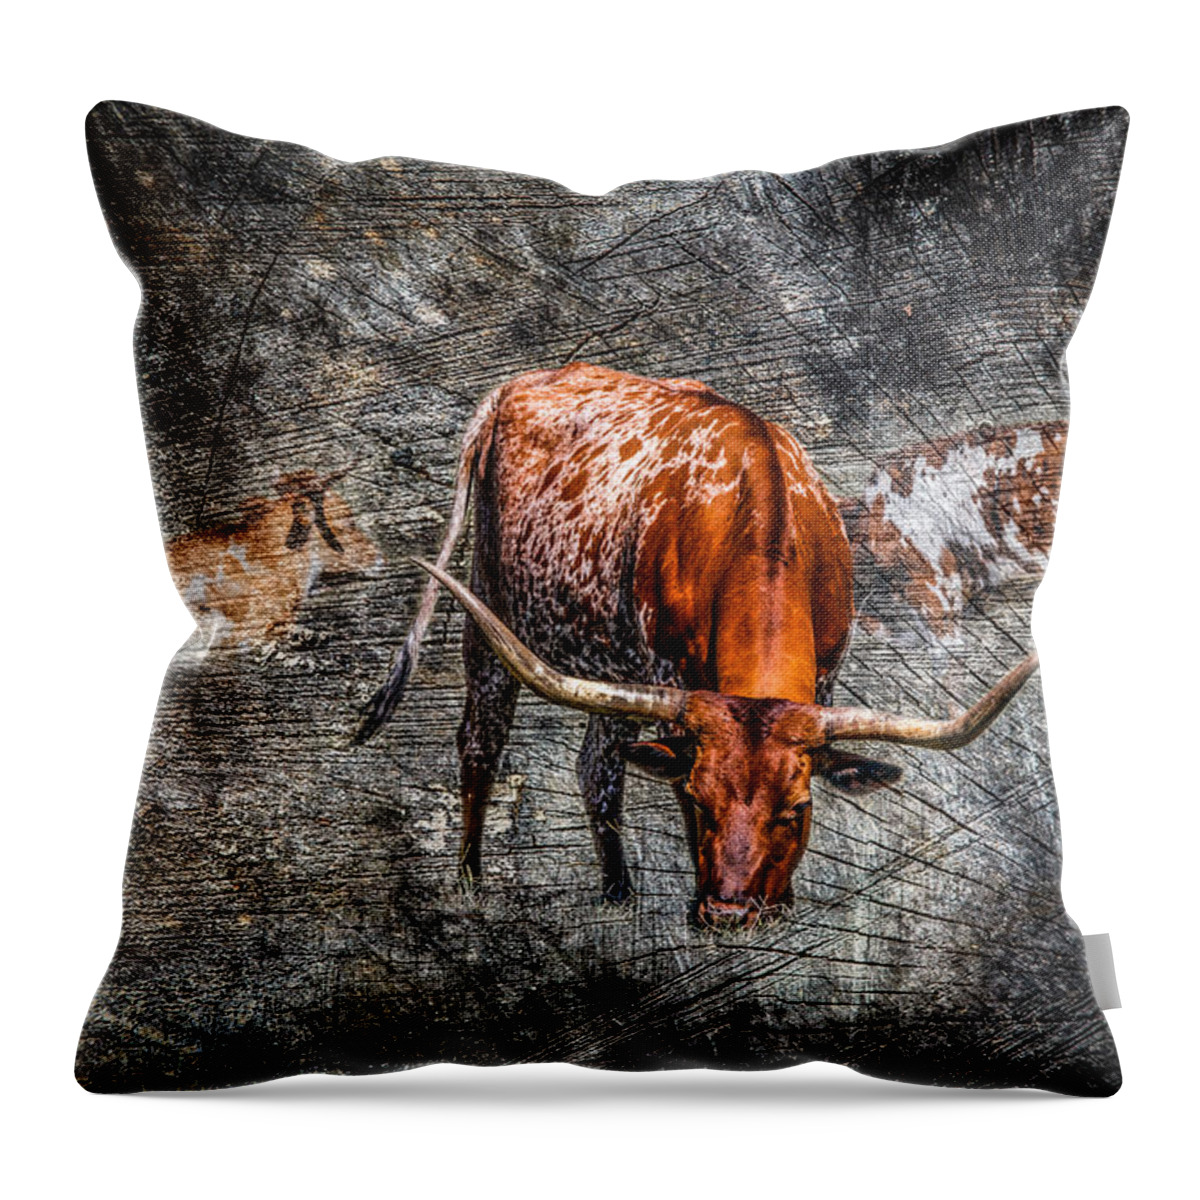 Animal Throw Pillow featuring the photograph Longhorn Cattle by Doug Long